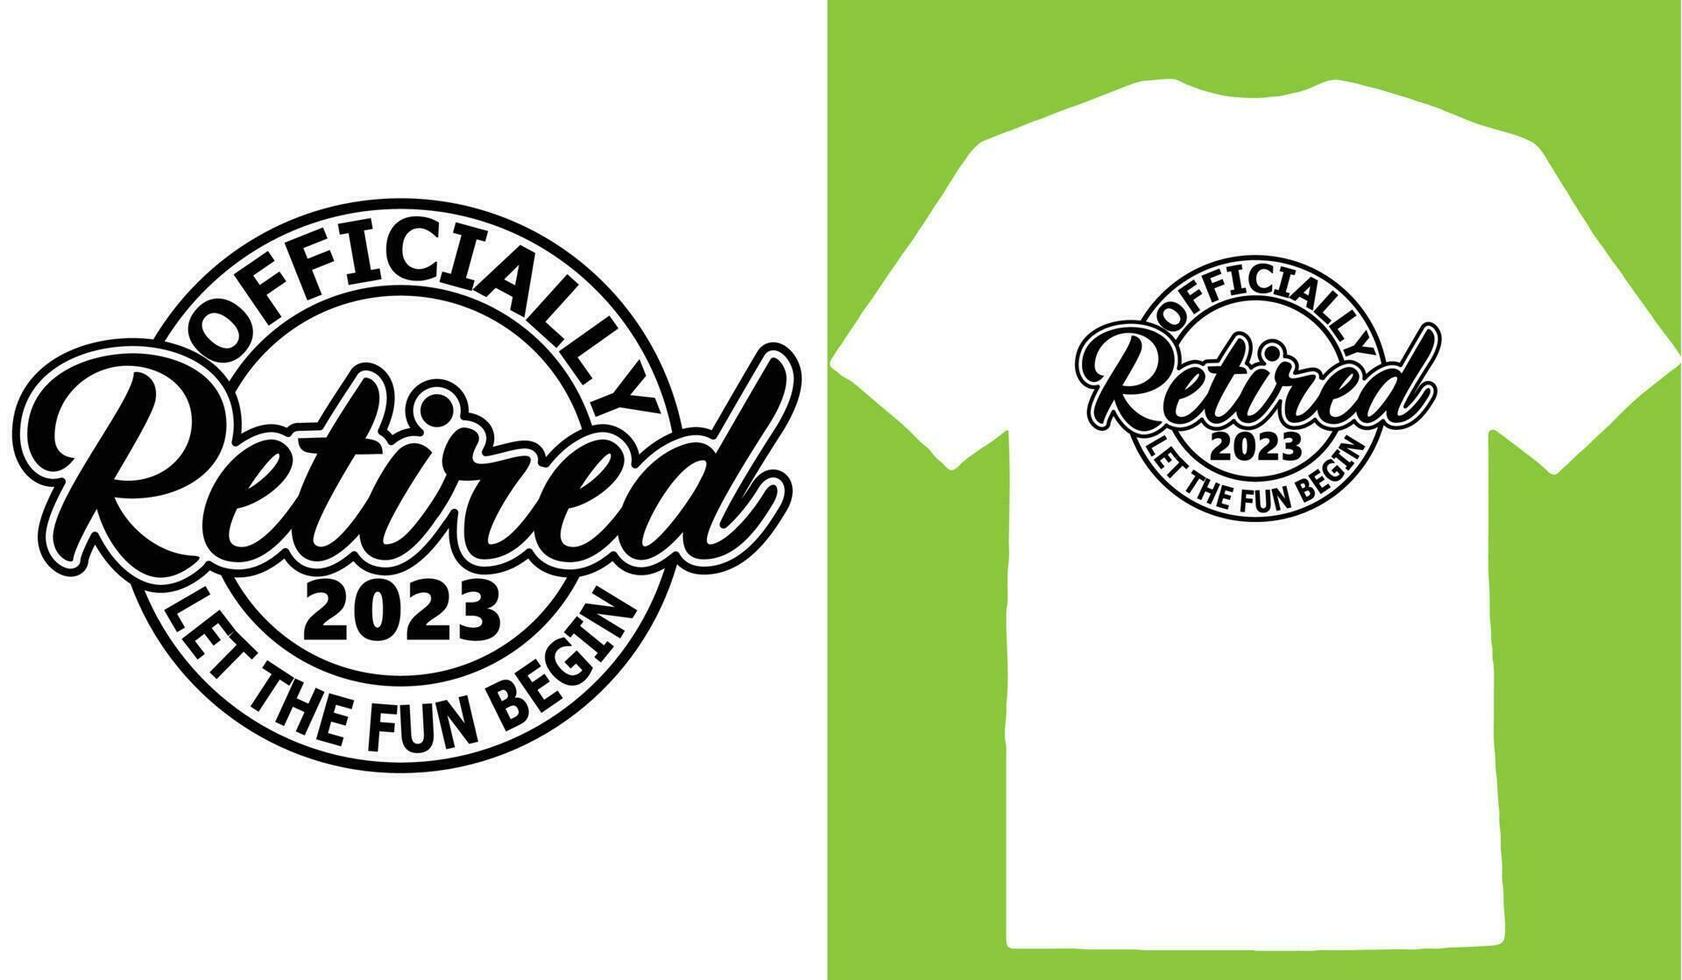 Officially Retired 2023 Let The Fun Begin T-shirt vector